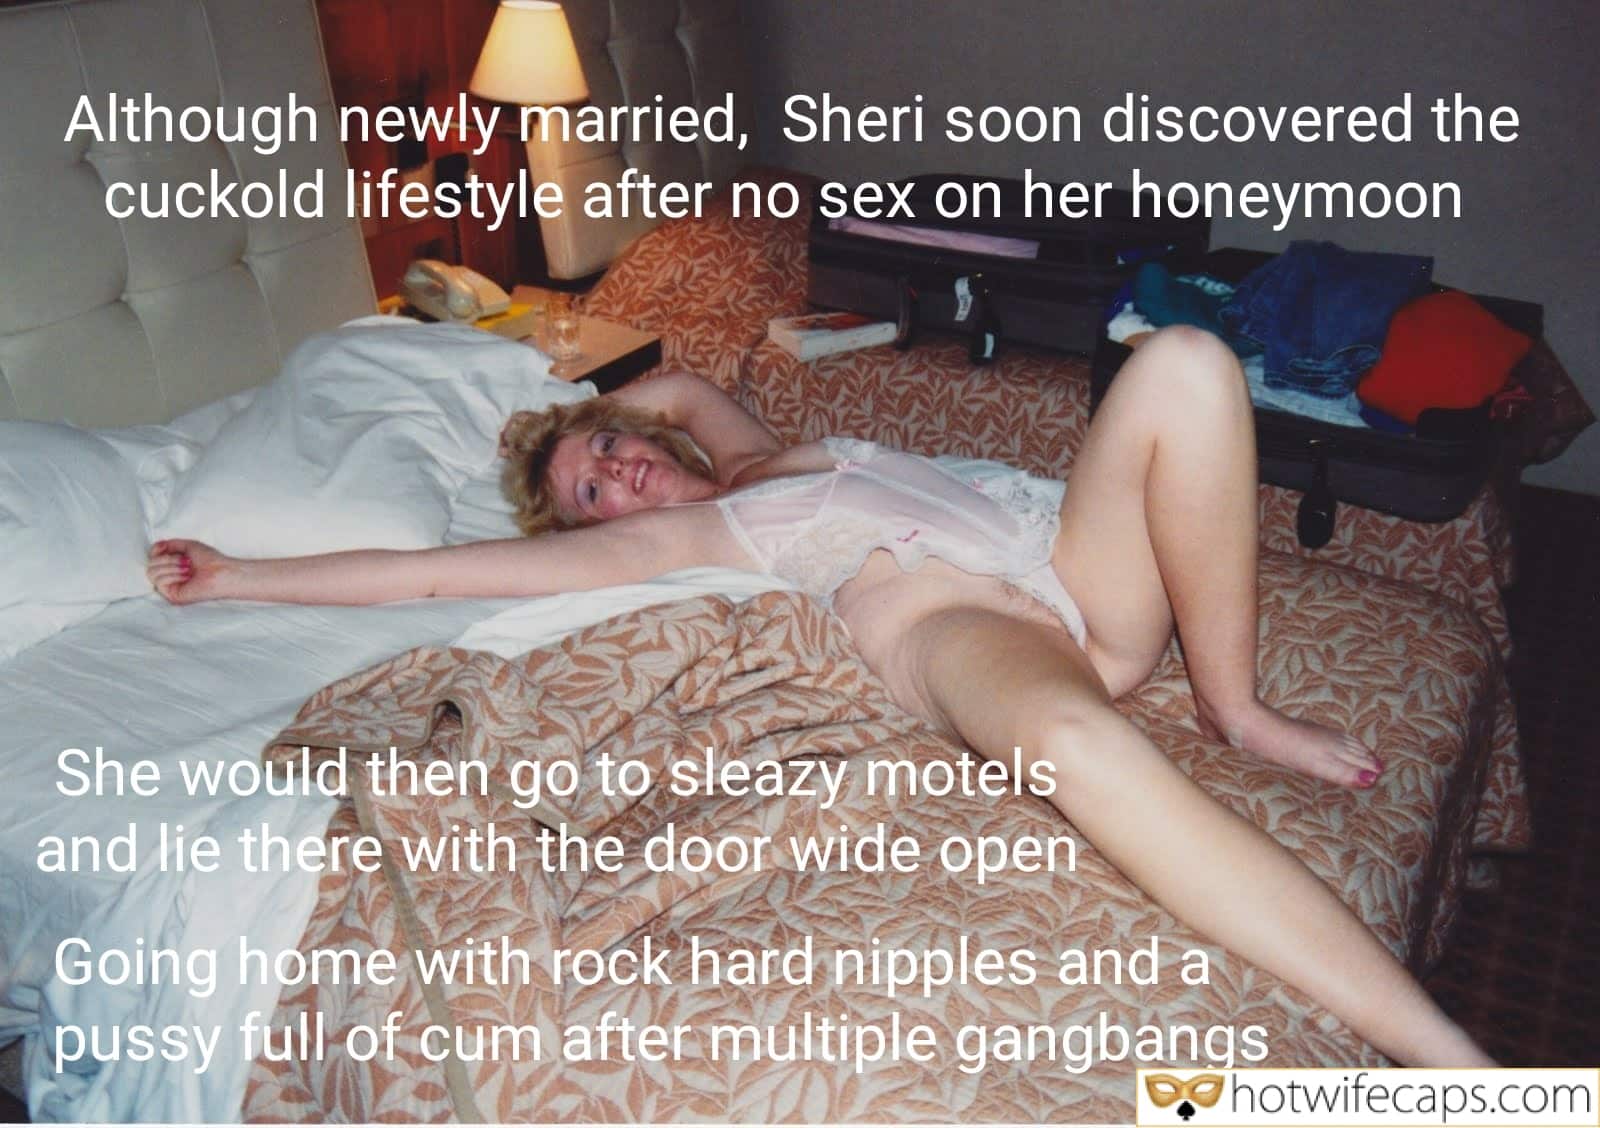 Cheating, Getting Ready, Group Sex, Humiliation Hotwife Caption №568885 Photo of slutty wife in bed before scheduled hotel gang bang image